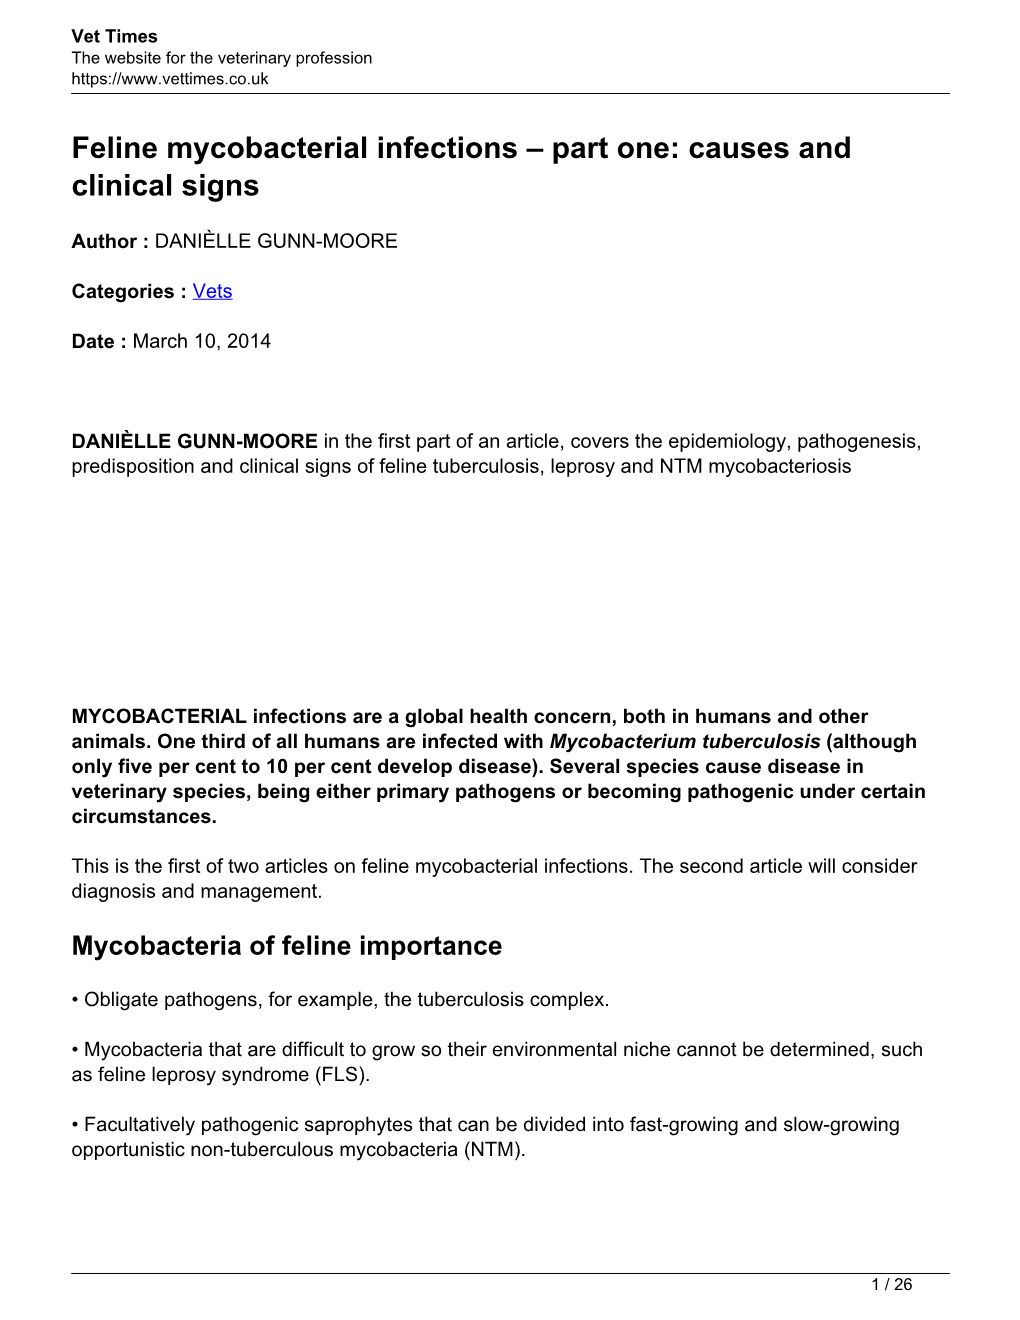 Feline Mycobacterial Infections – Part One: Causes and Clinical Signs